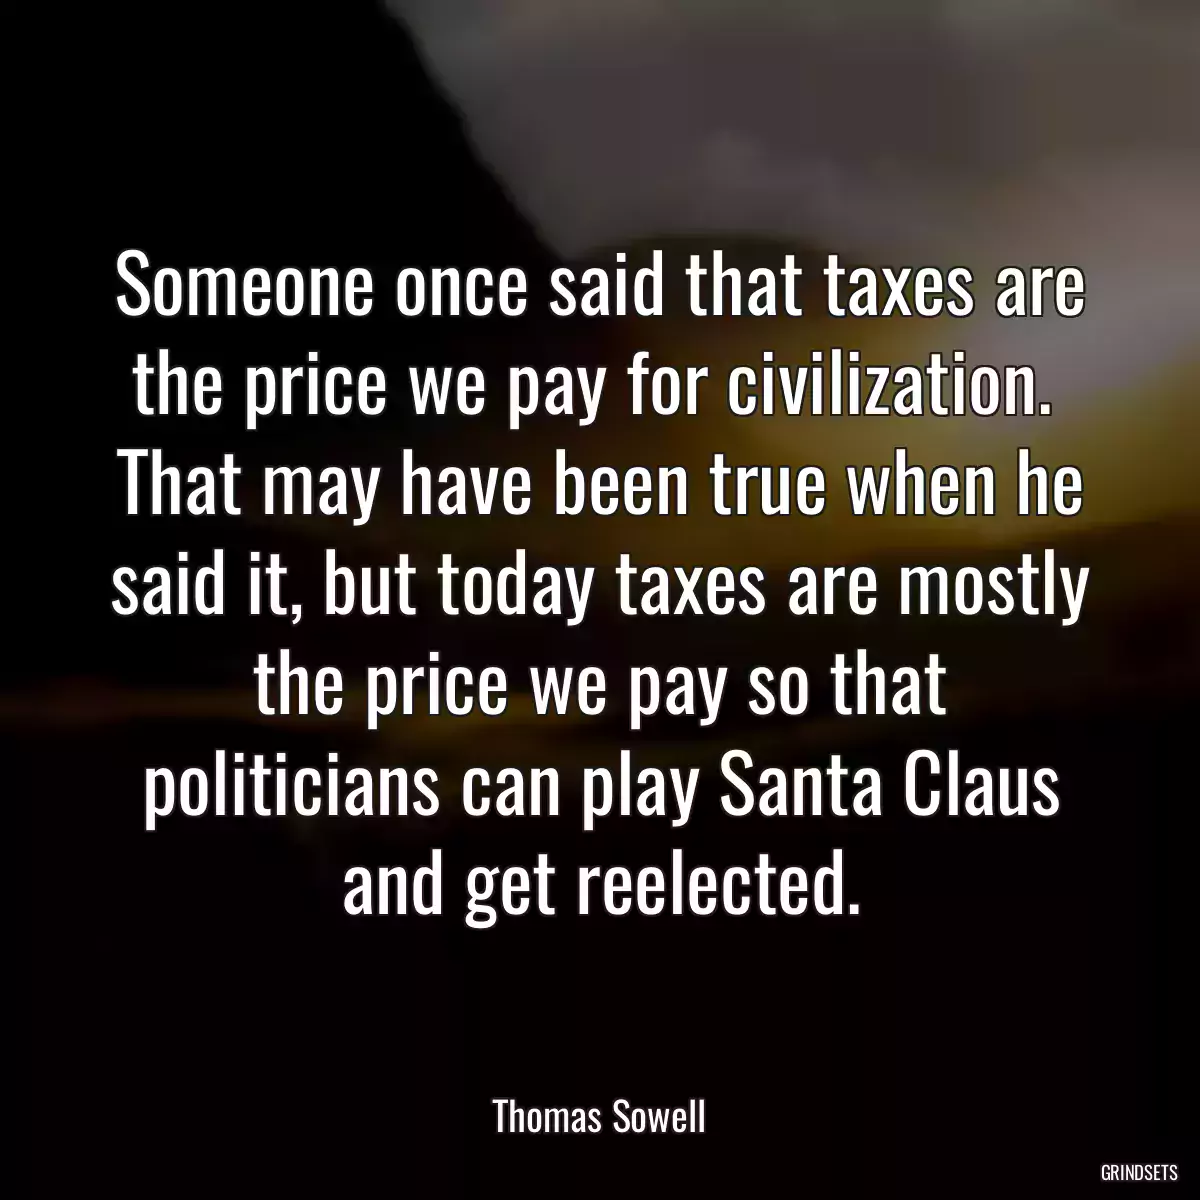 Someone once said that taxes are the price we pay for civilization.  That may have been true when he said it, but today taxes are mostly the price we pay so that politicians can play Santa Claus and get reelected.